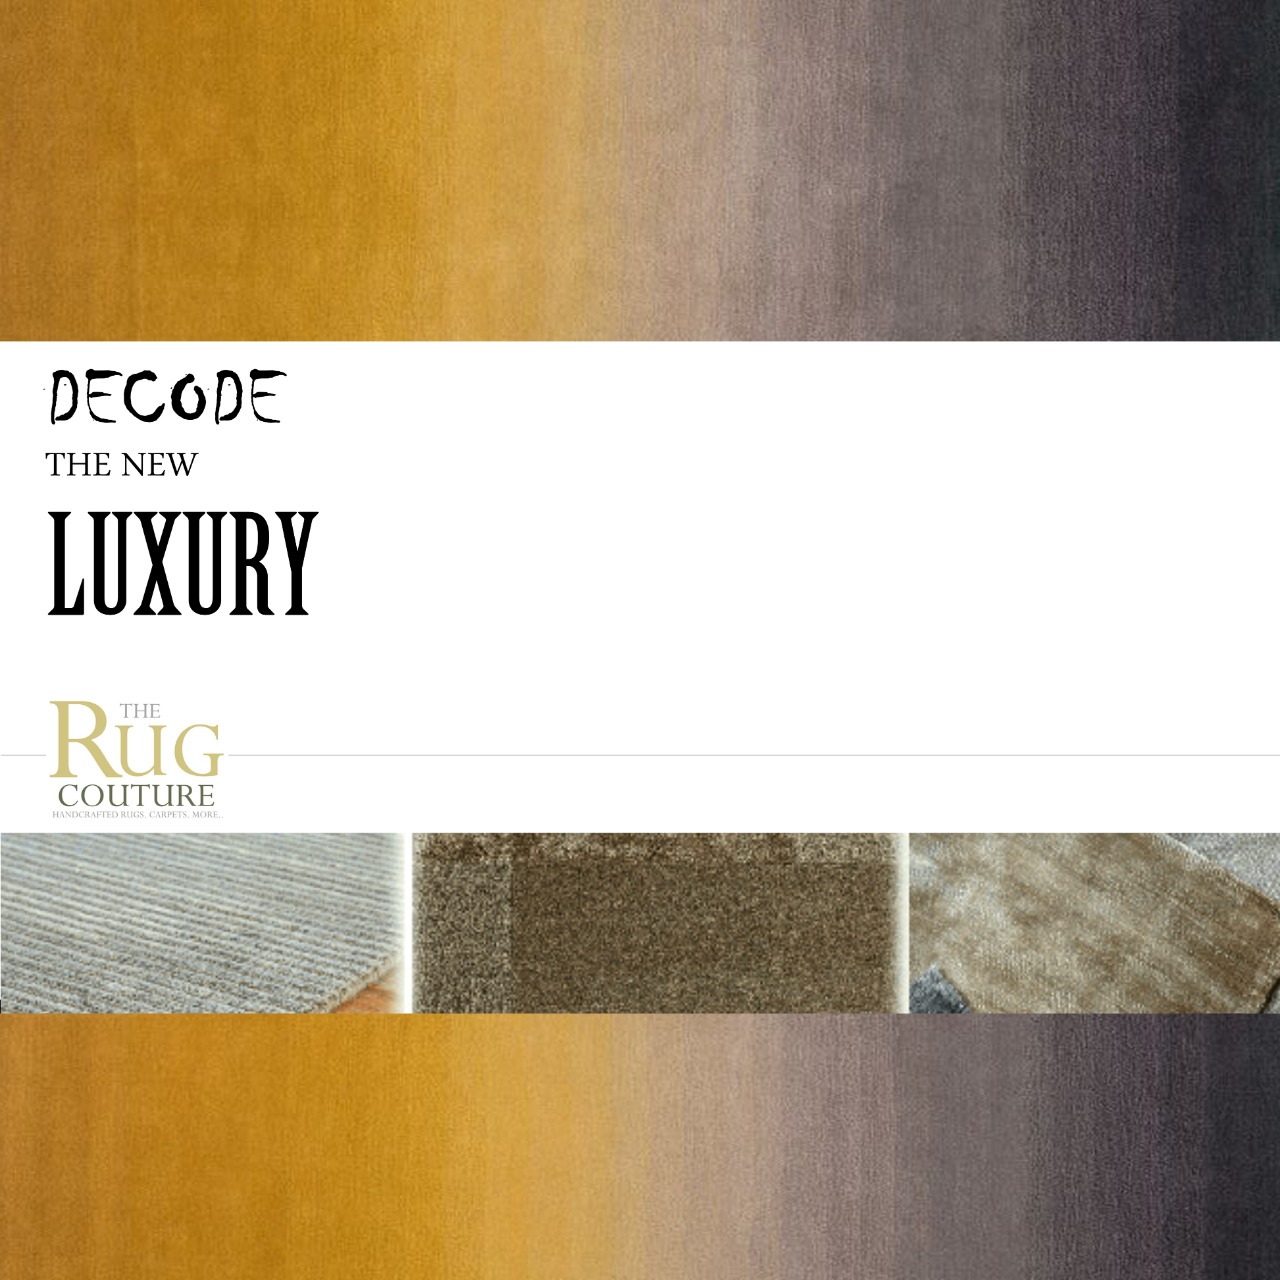 What is a luxury rug?